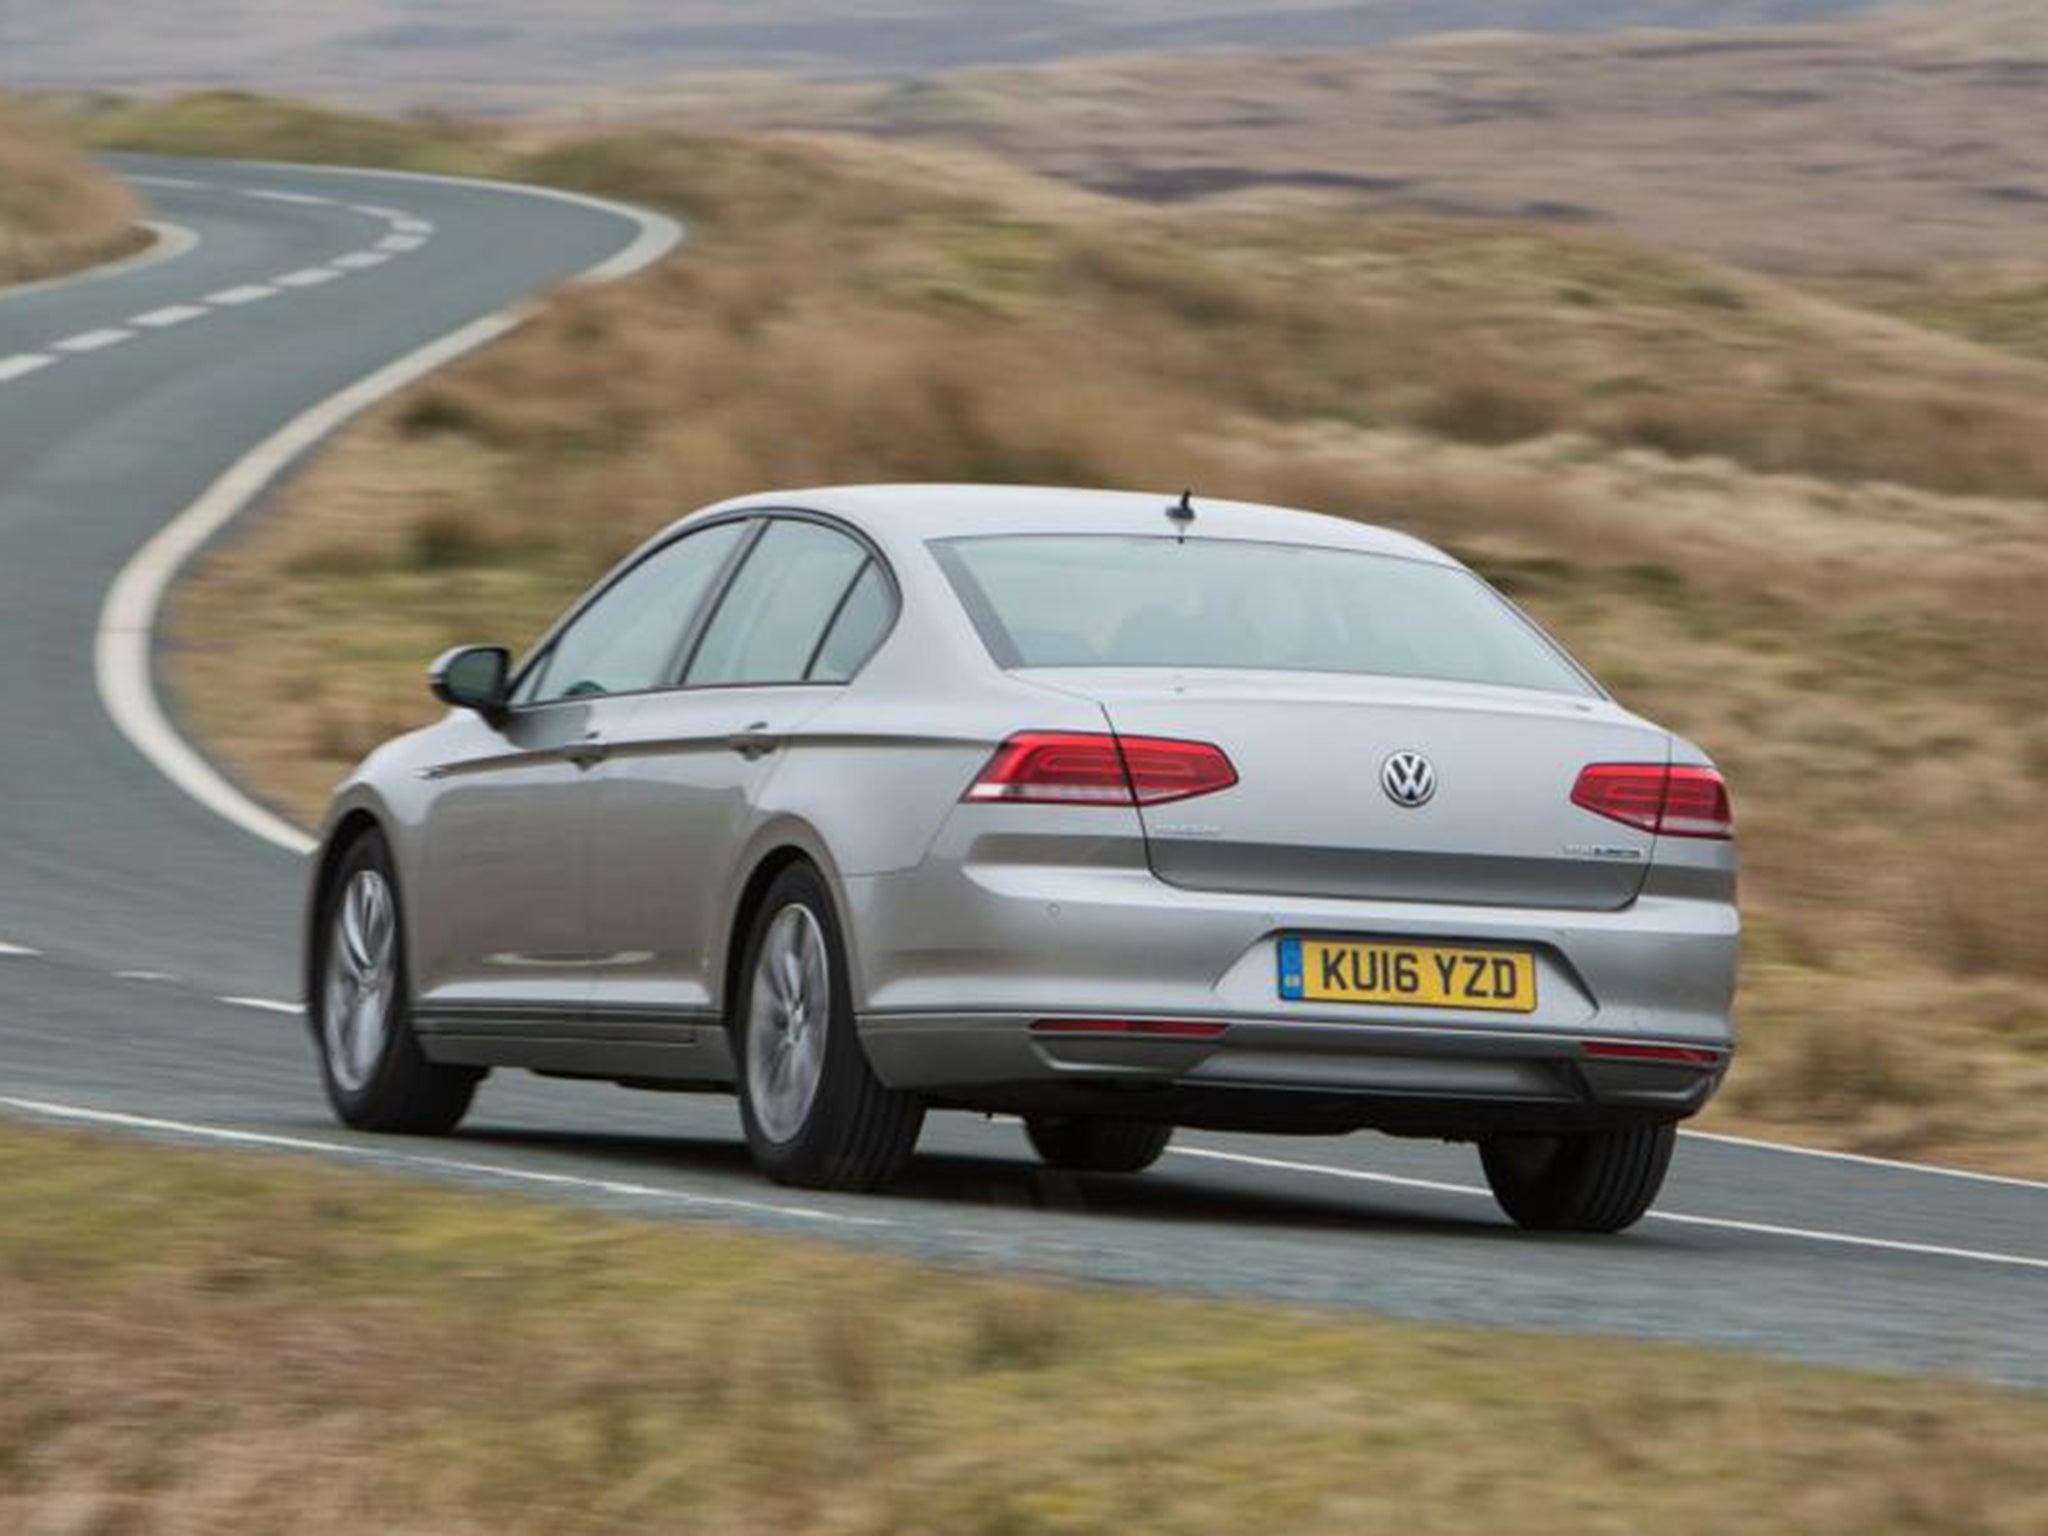 The Bluemotion can manage a highly creditable 76.3mpg